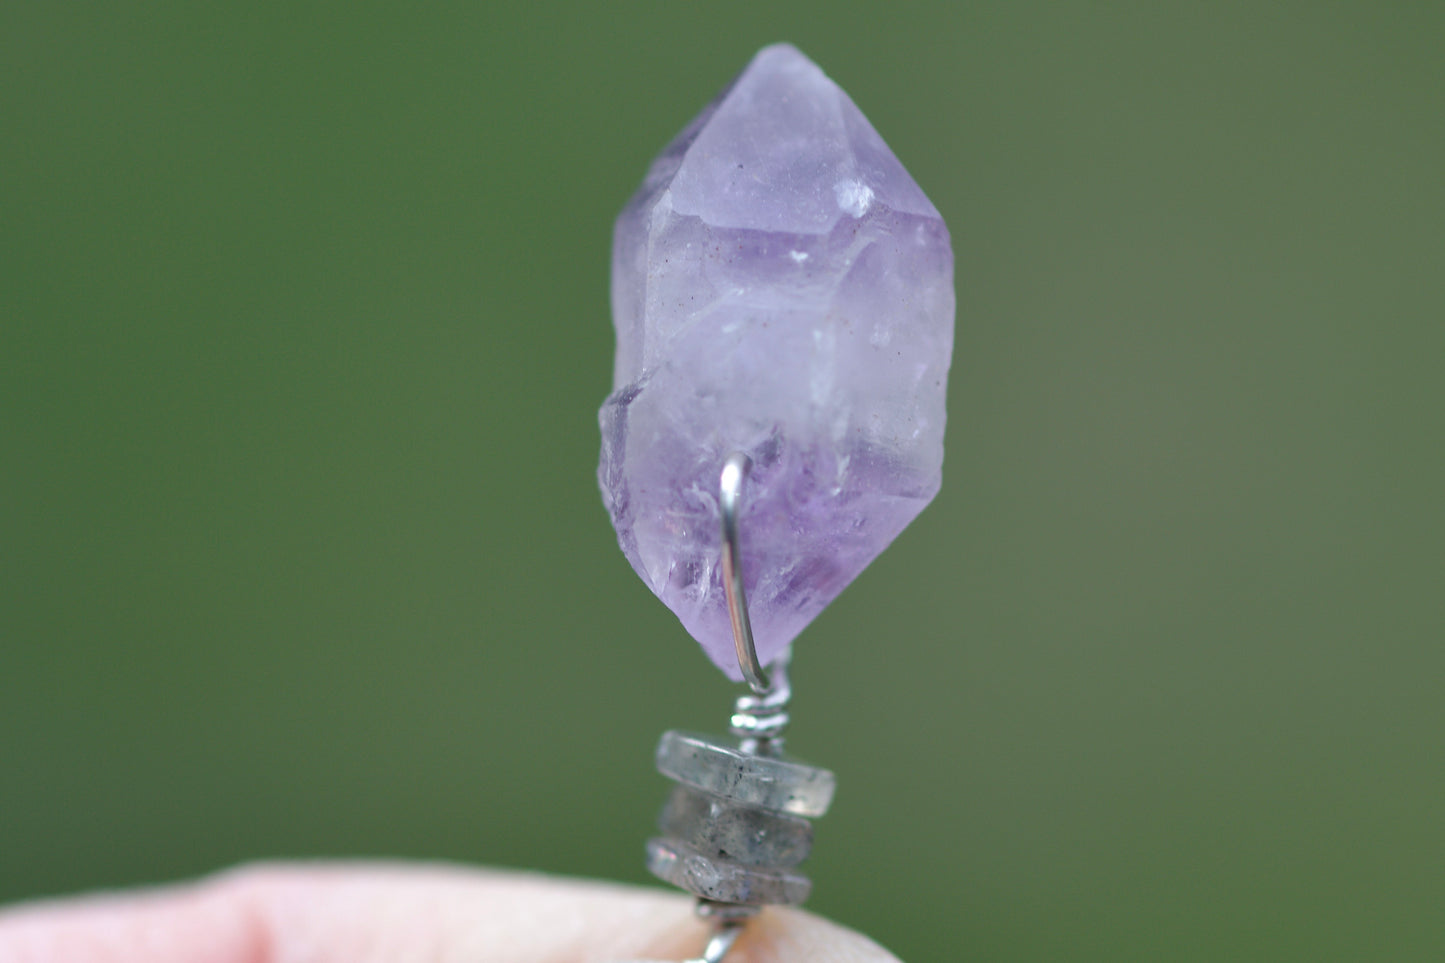 Double Termination Amethyst Crystal, Labradorite, and Sterling Silver Pendant Necklace